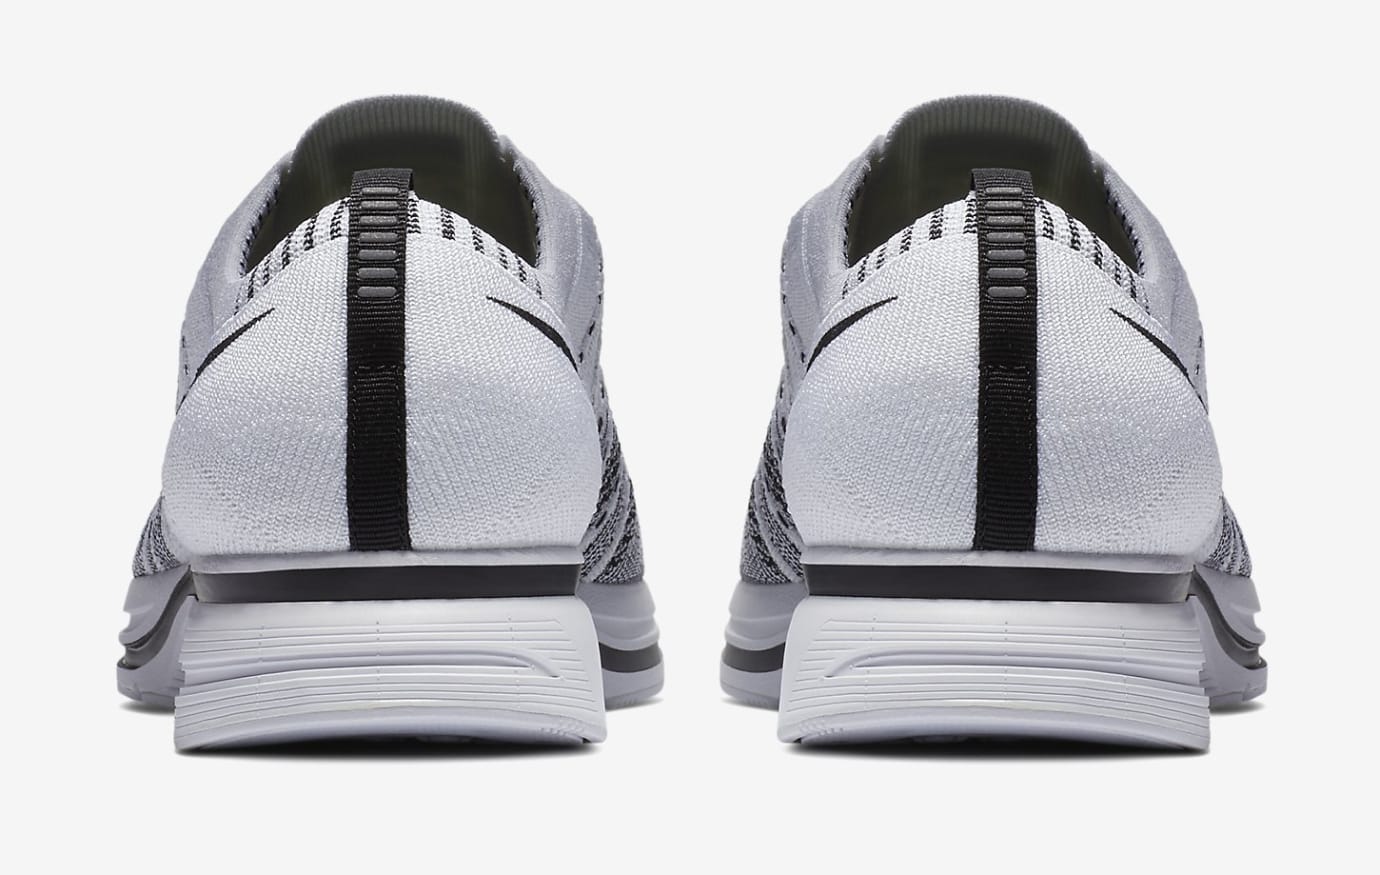 Nike Flyknit Trainer White Black AH8396-100 Release Date | Sole Collector